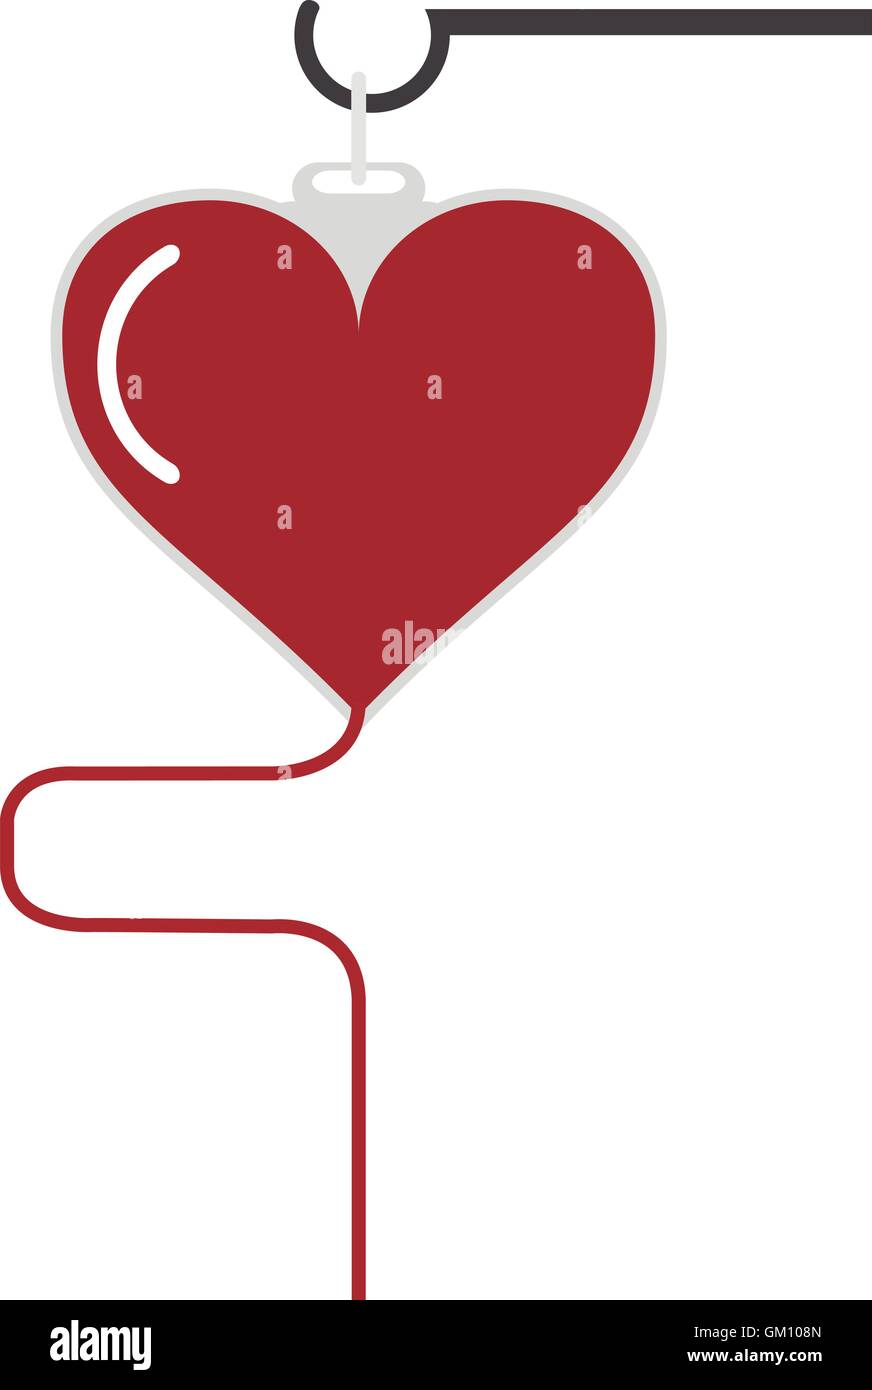 blood bag and cartoon heart icon Stock Vector